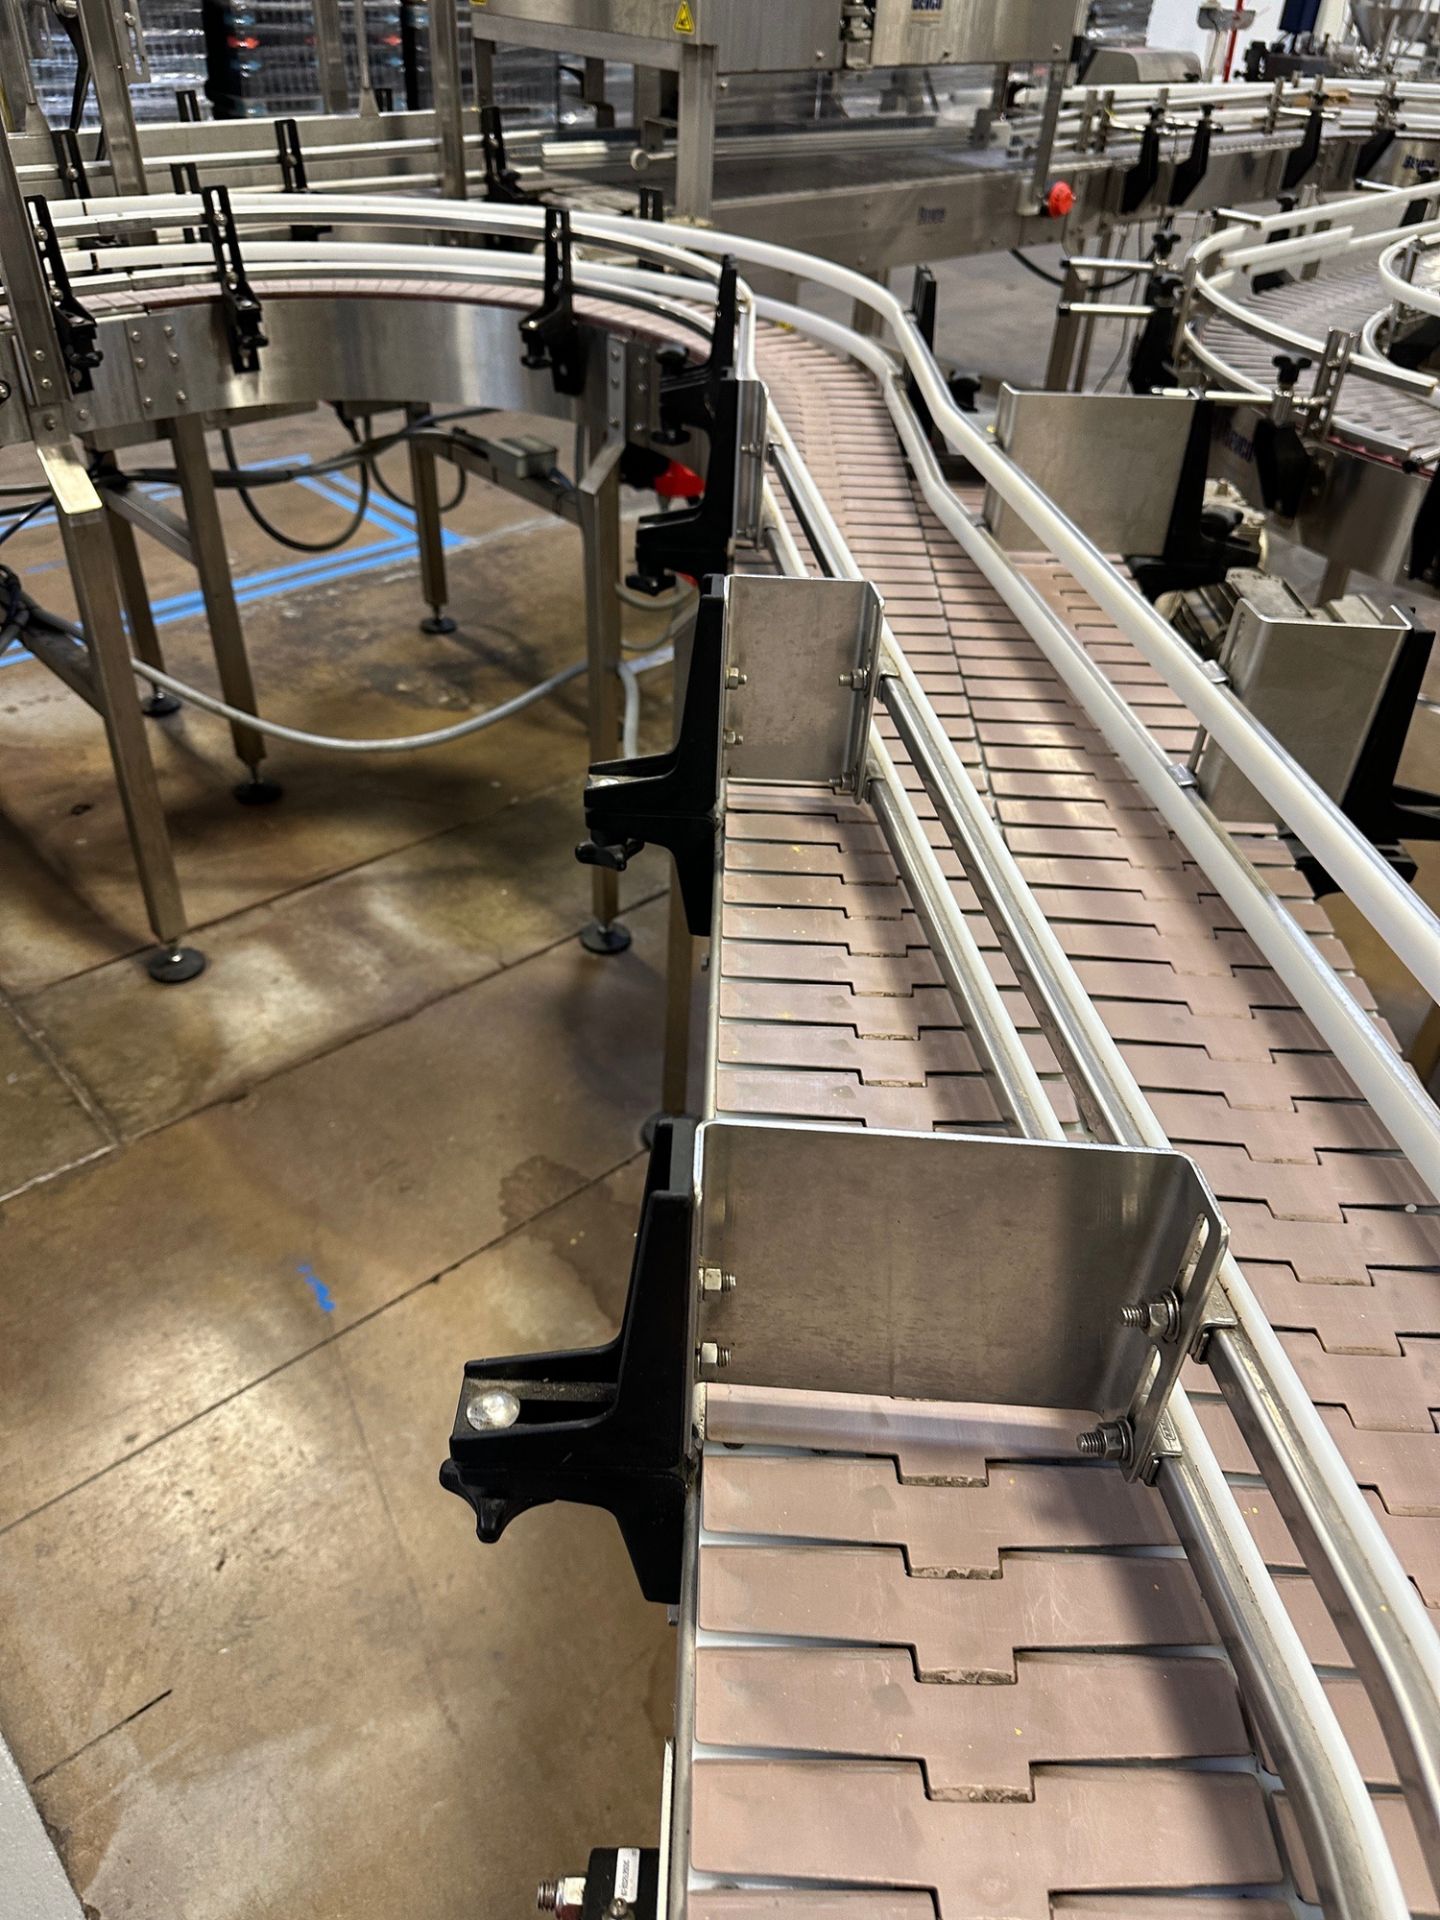 Bevco Conveyor over Stainless Steel Frame - U Shaped with SEW VFD (Approx. 7.5" Bel | Rig Fee $750 - Image 2 of 5